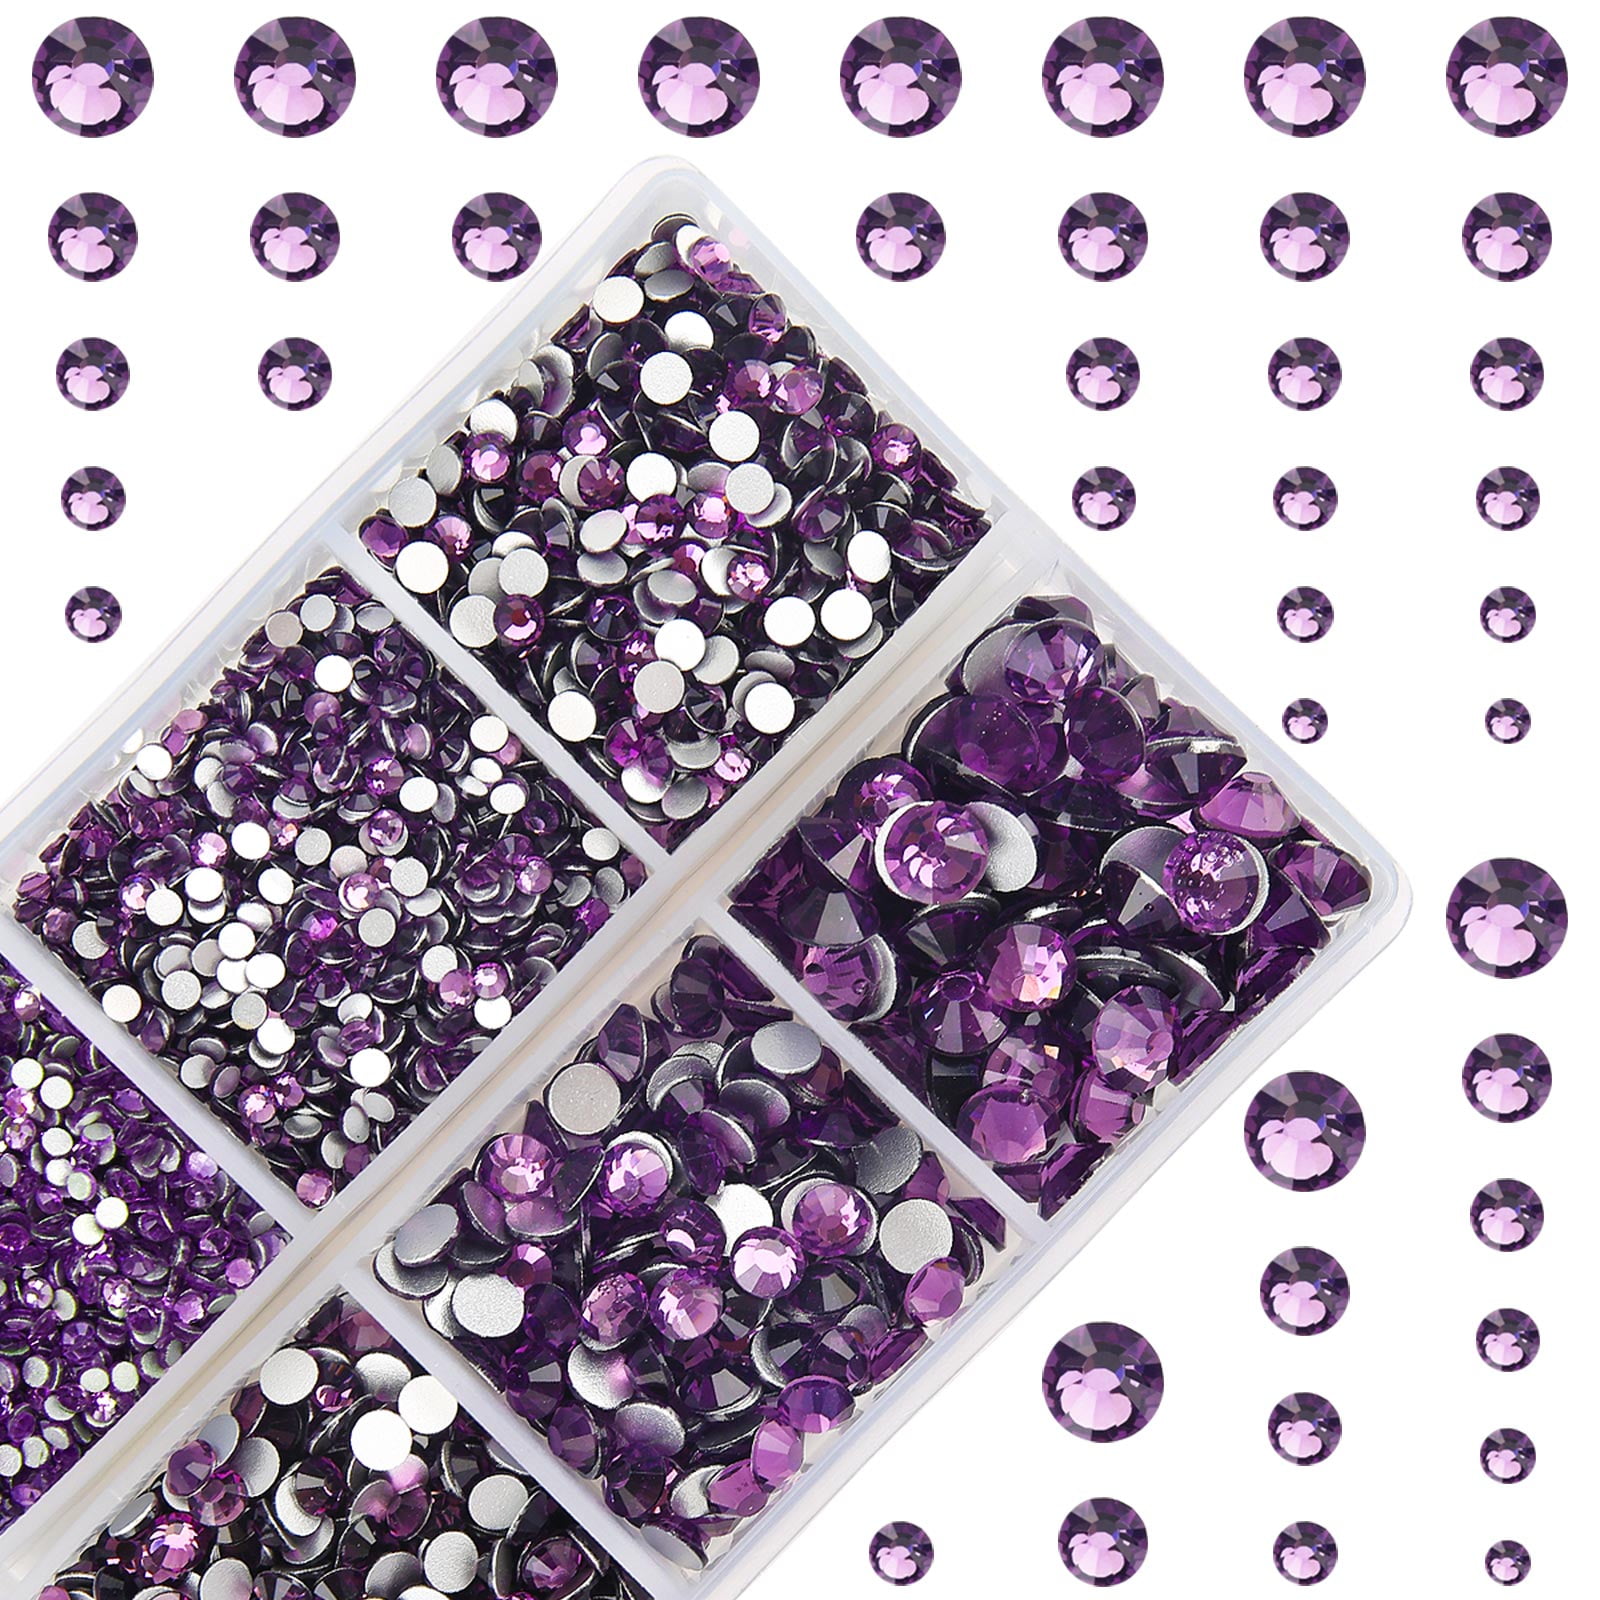 High Quality Crystals LILAC PURPLE Rhinestones Loose Flat Back No Hot Fix  Bead Size Ss16 / Ss30 